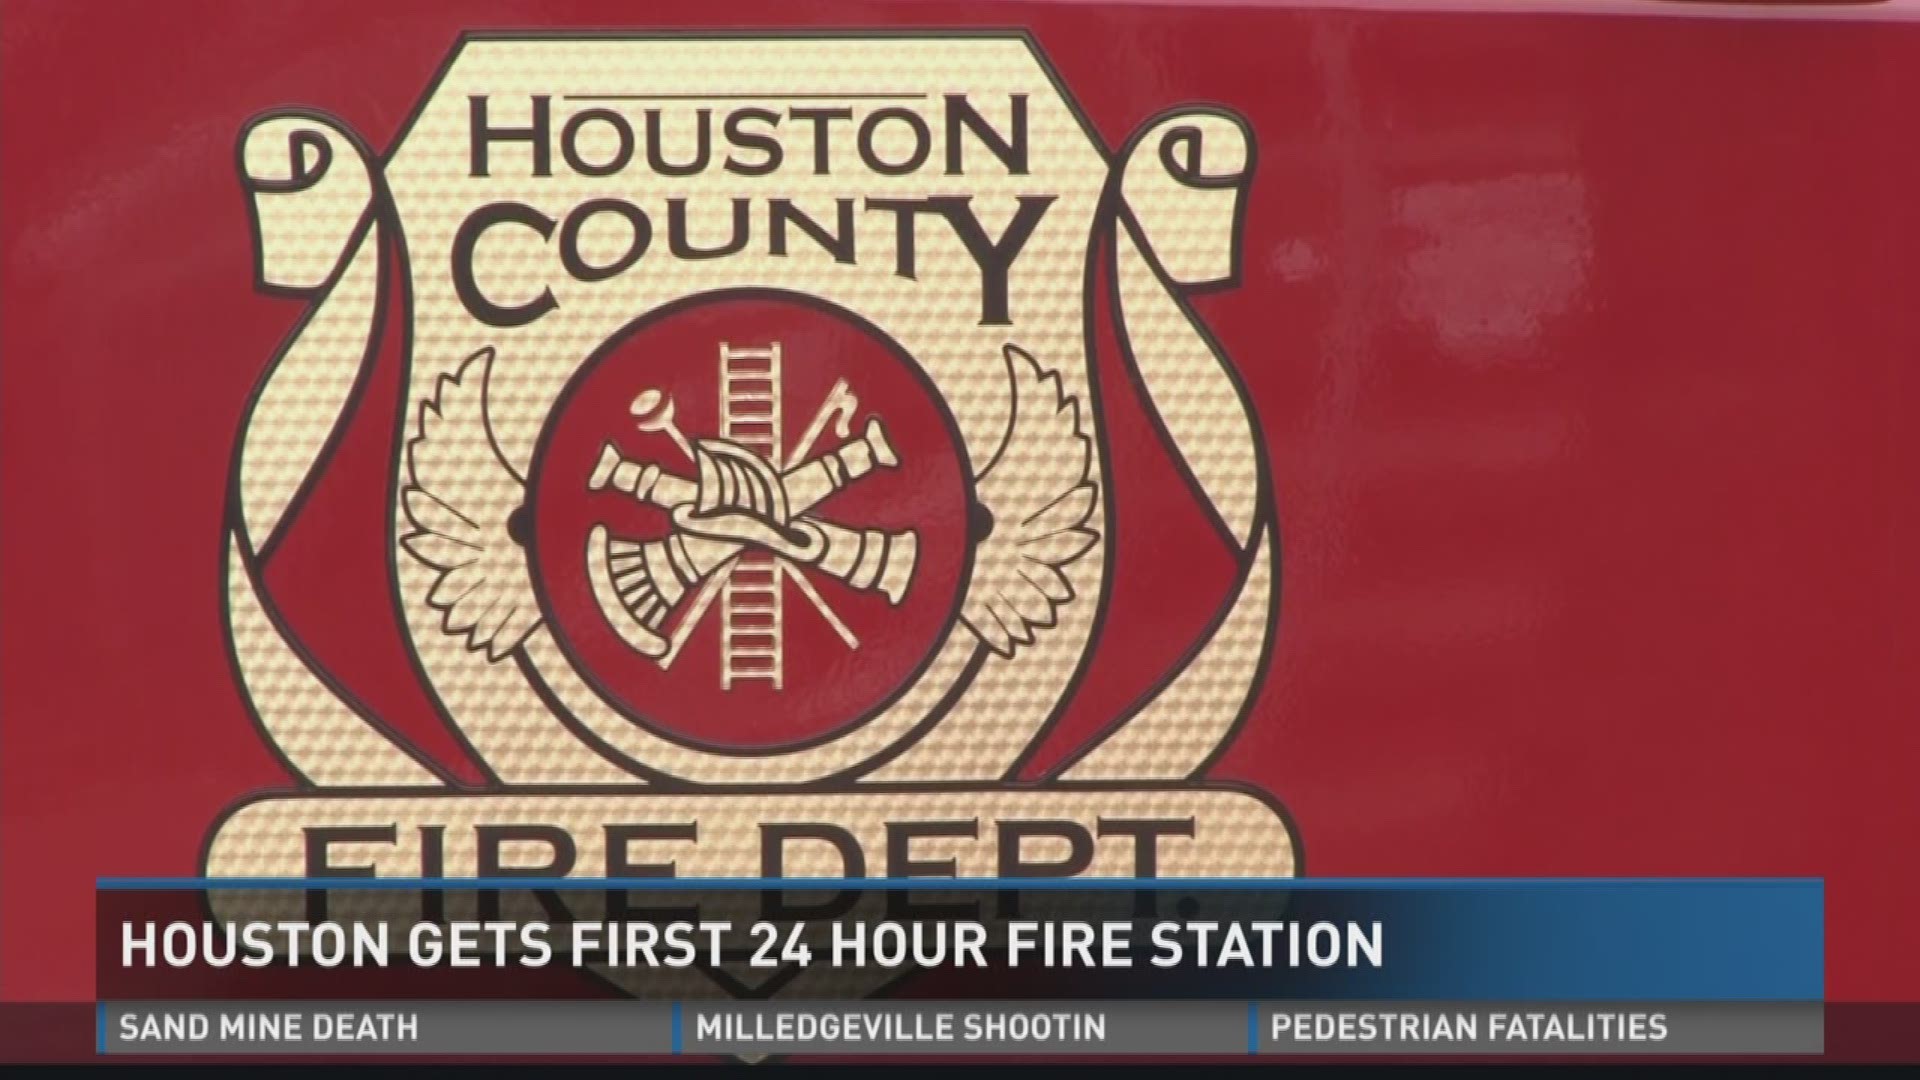 Houston Co. gets first 24-hour fire station